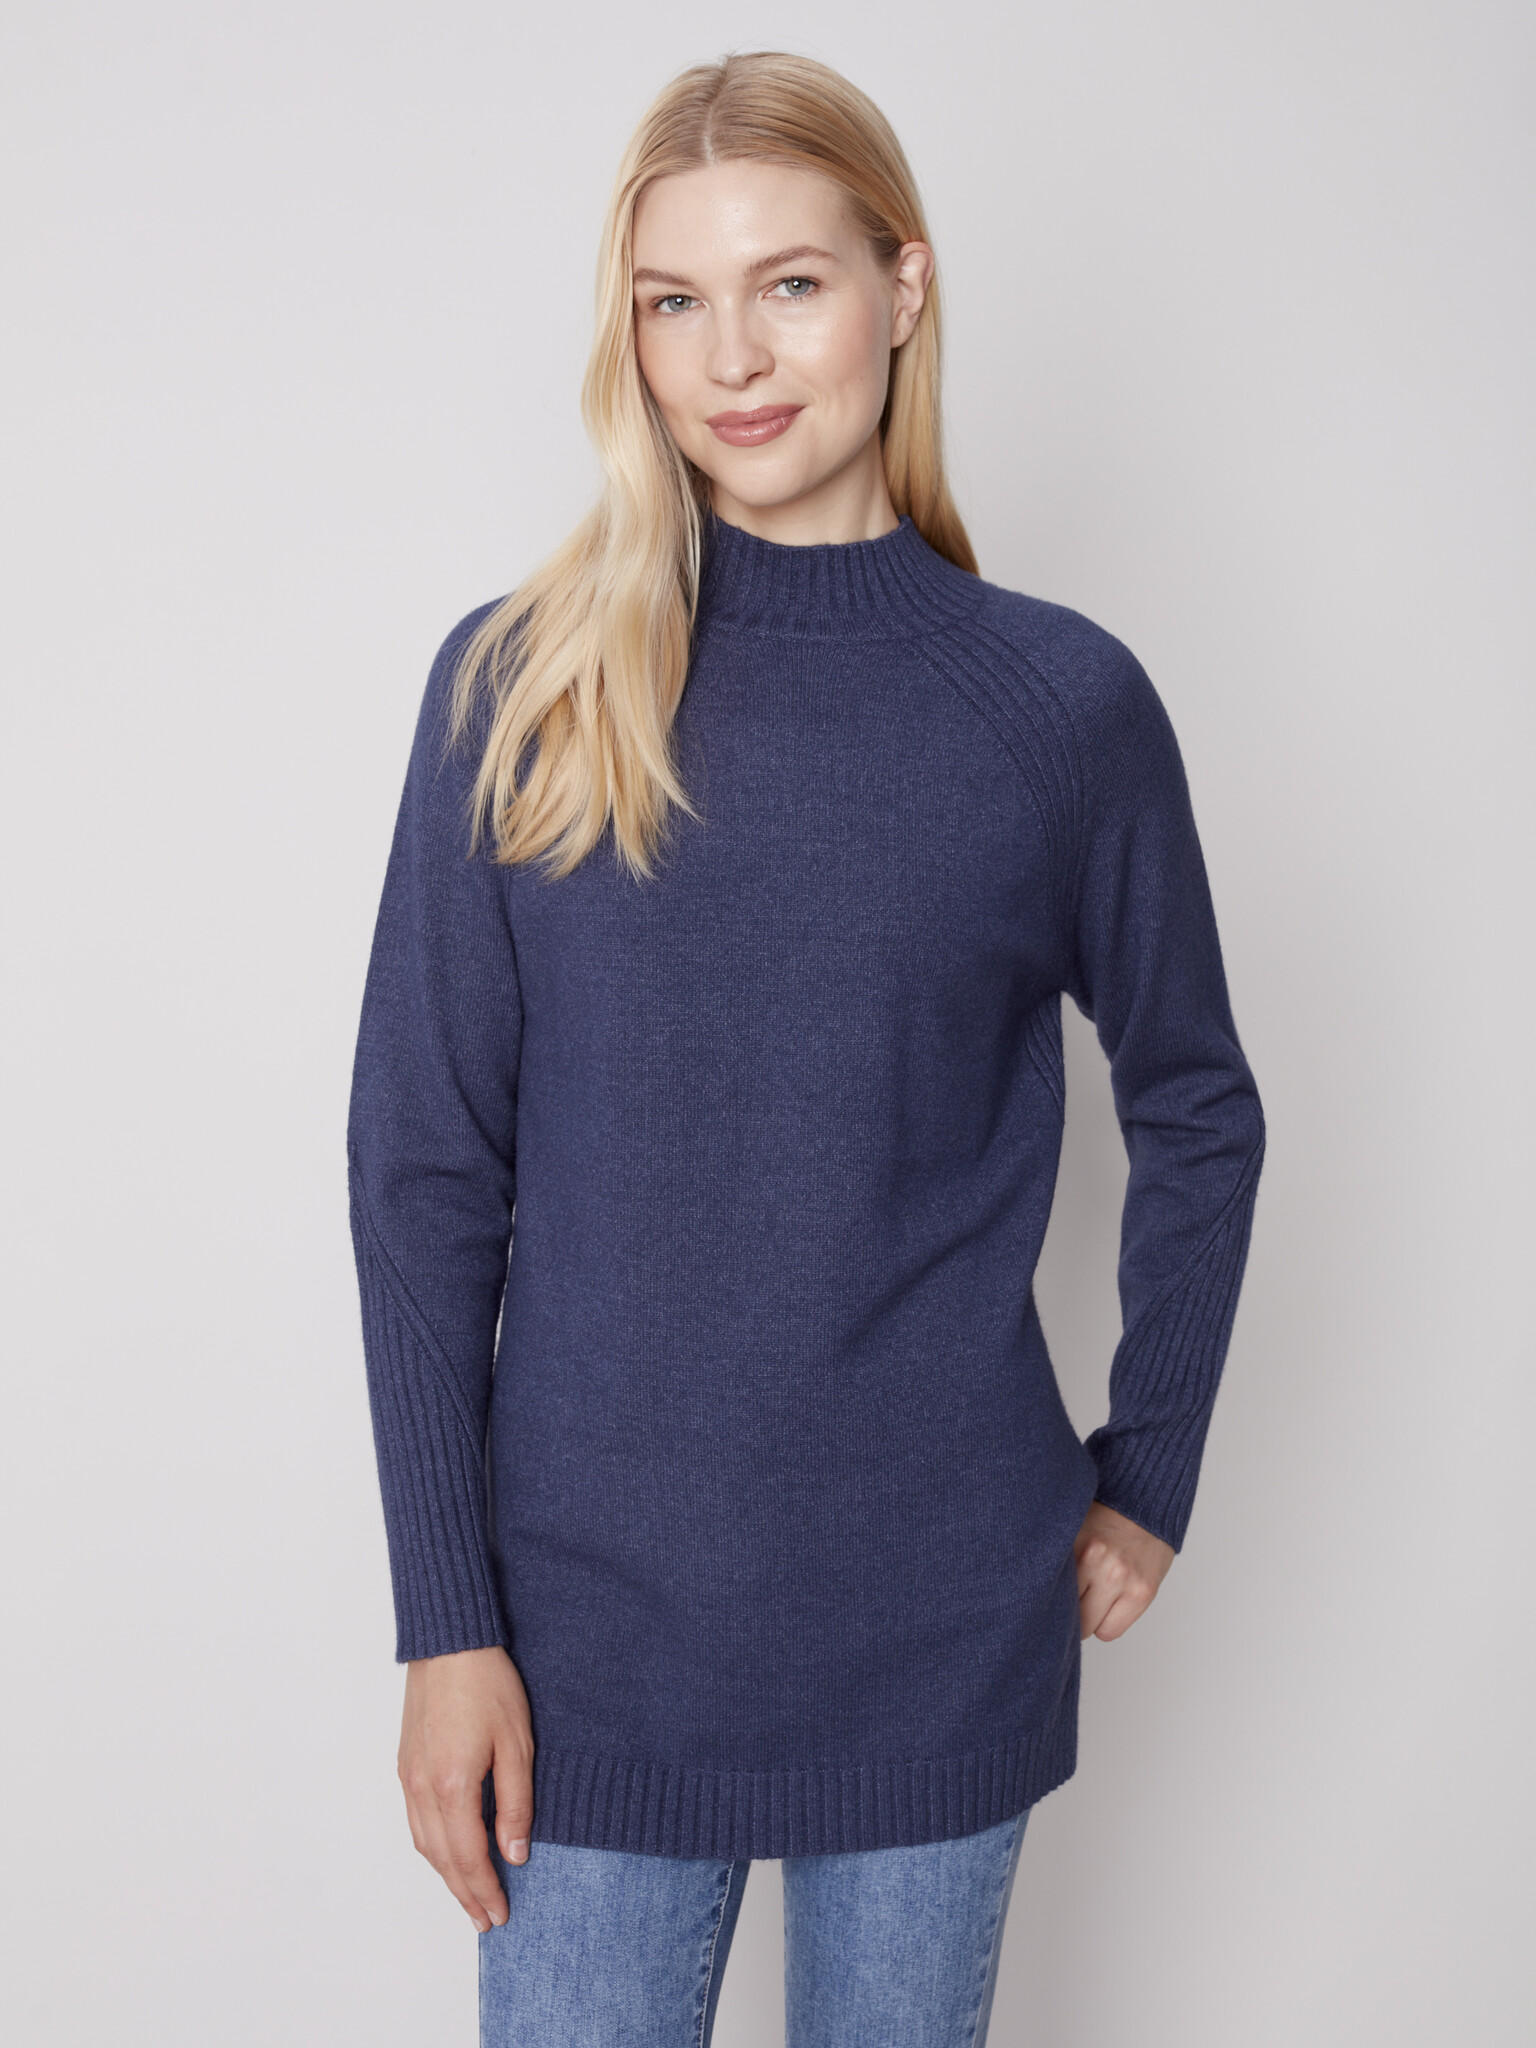 Charlie B - Tunic Sweater - Castles & Cottages